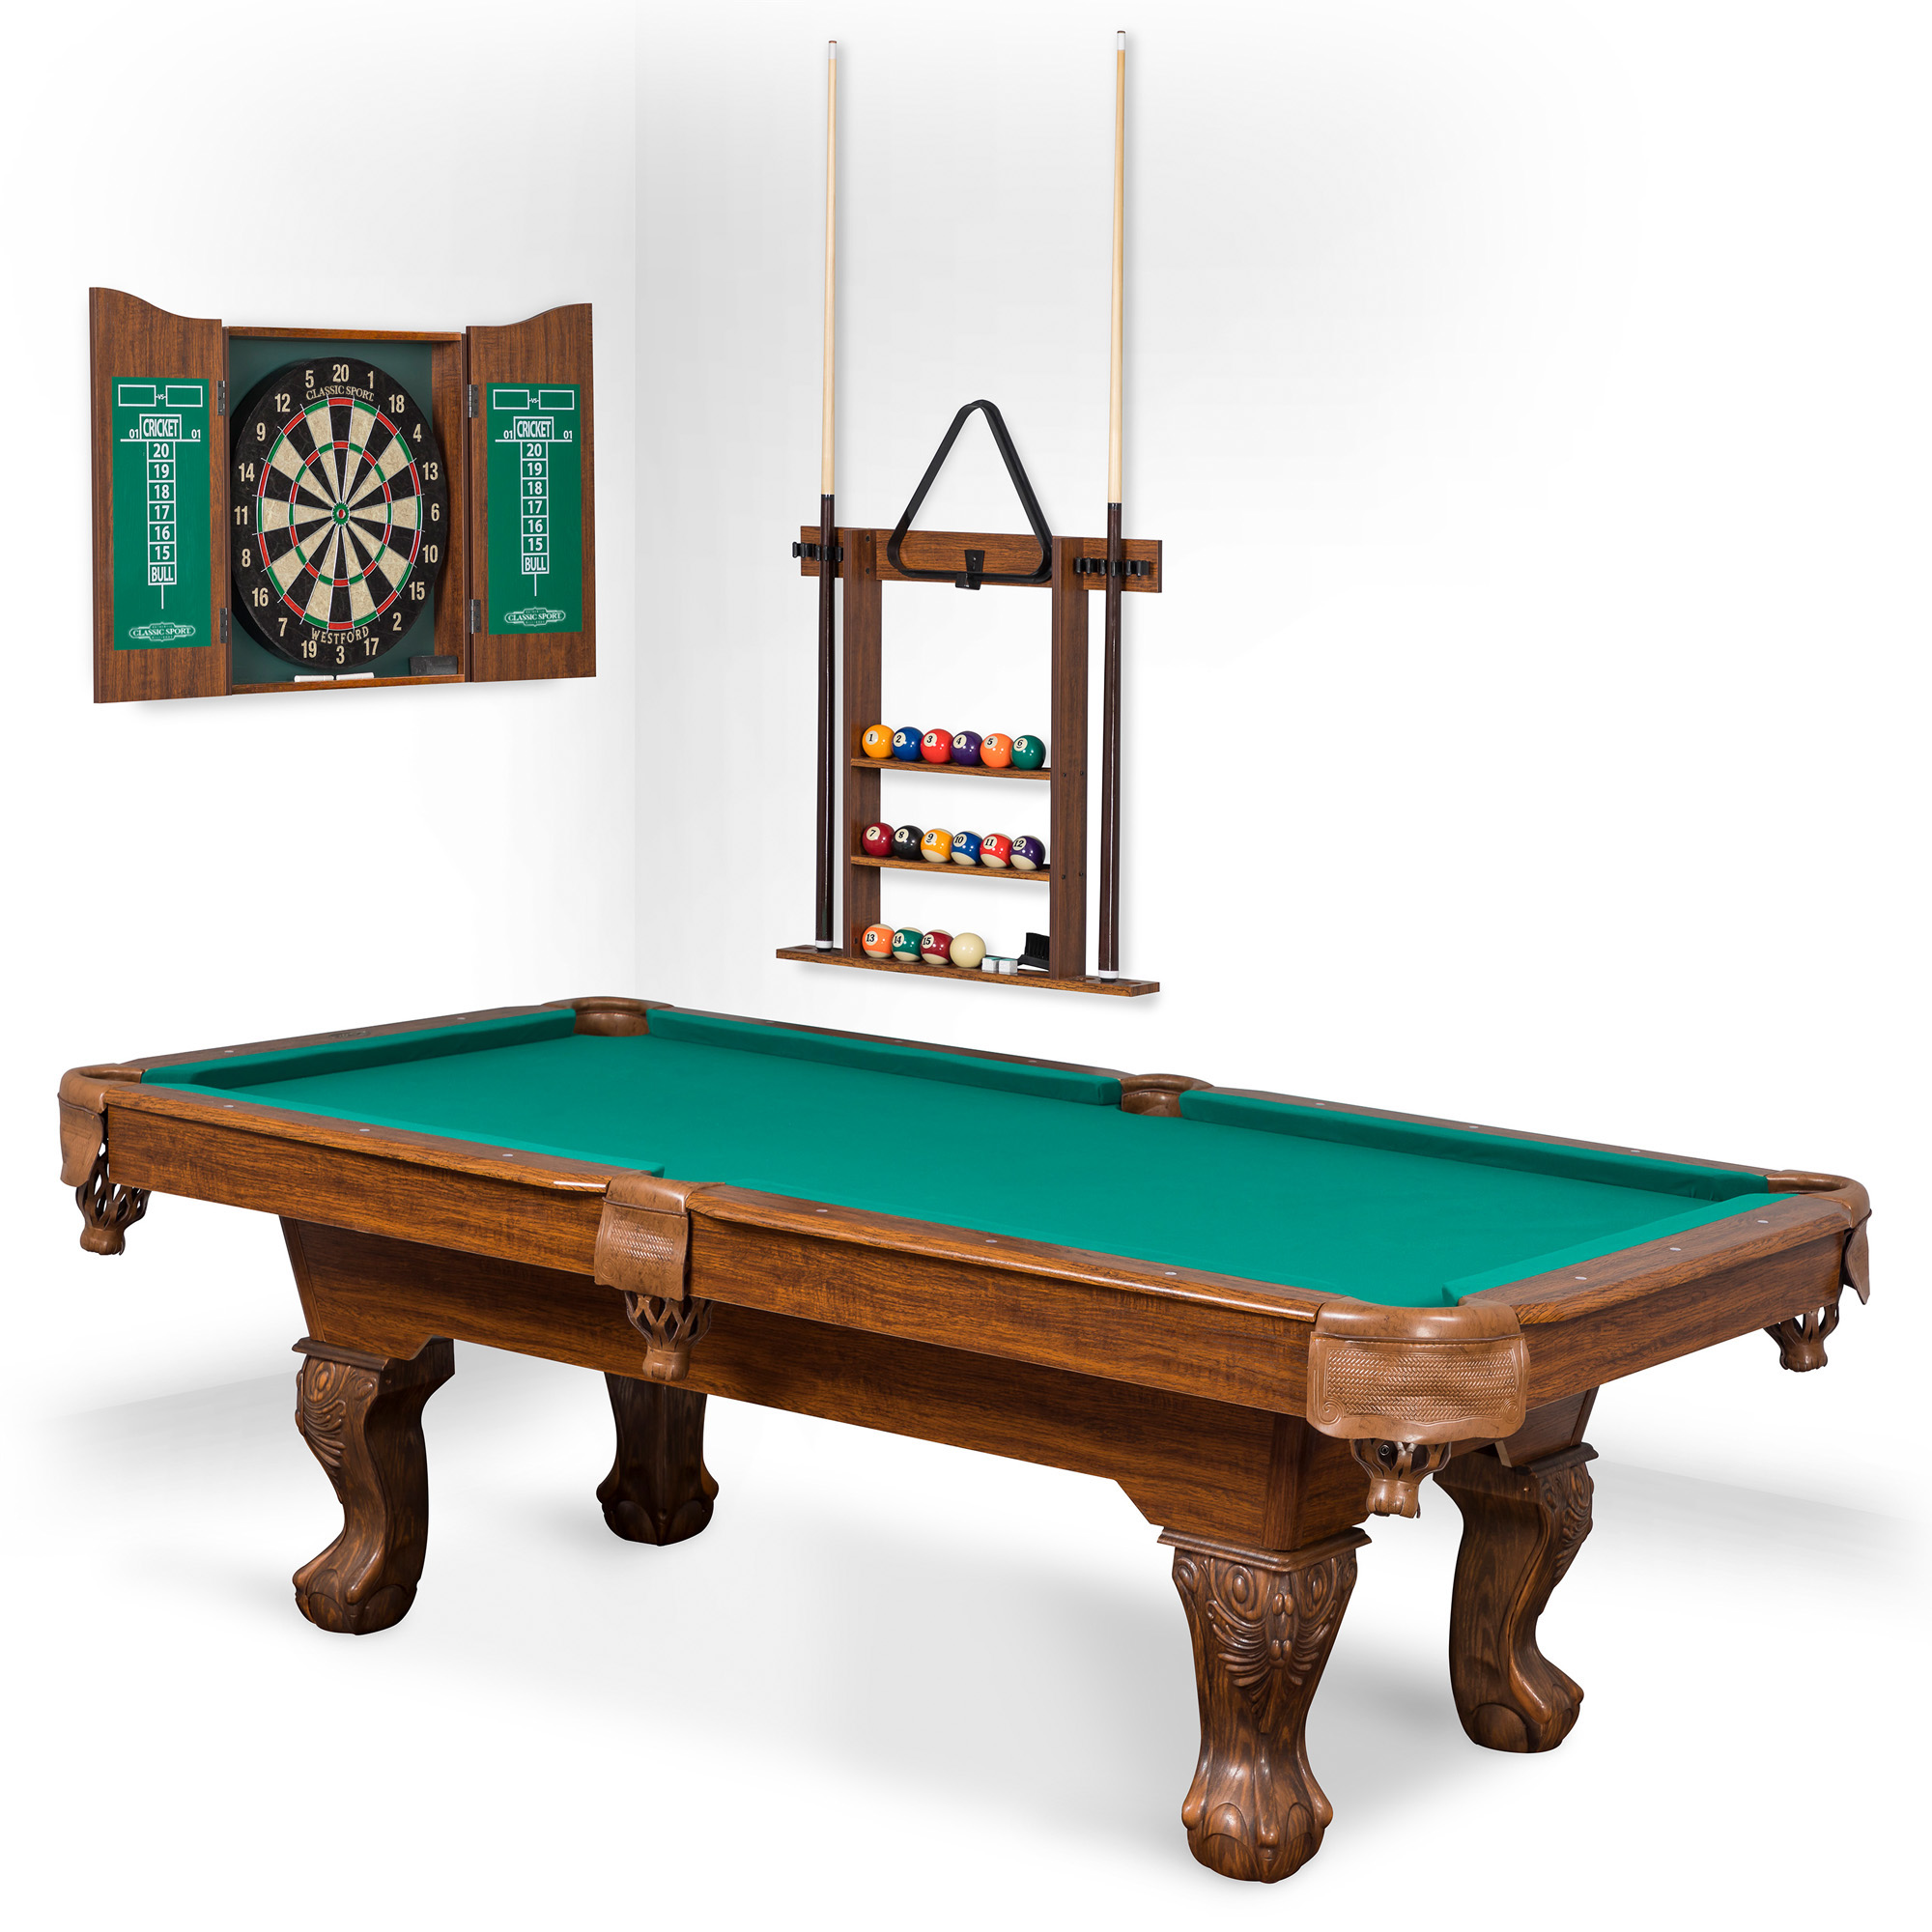 EastPoint Sports 90" Westford Pool Table with Dartboard & Cabinet - image 1 of 13